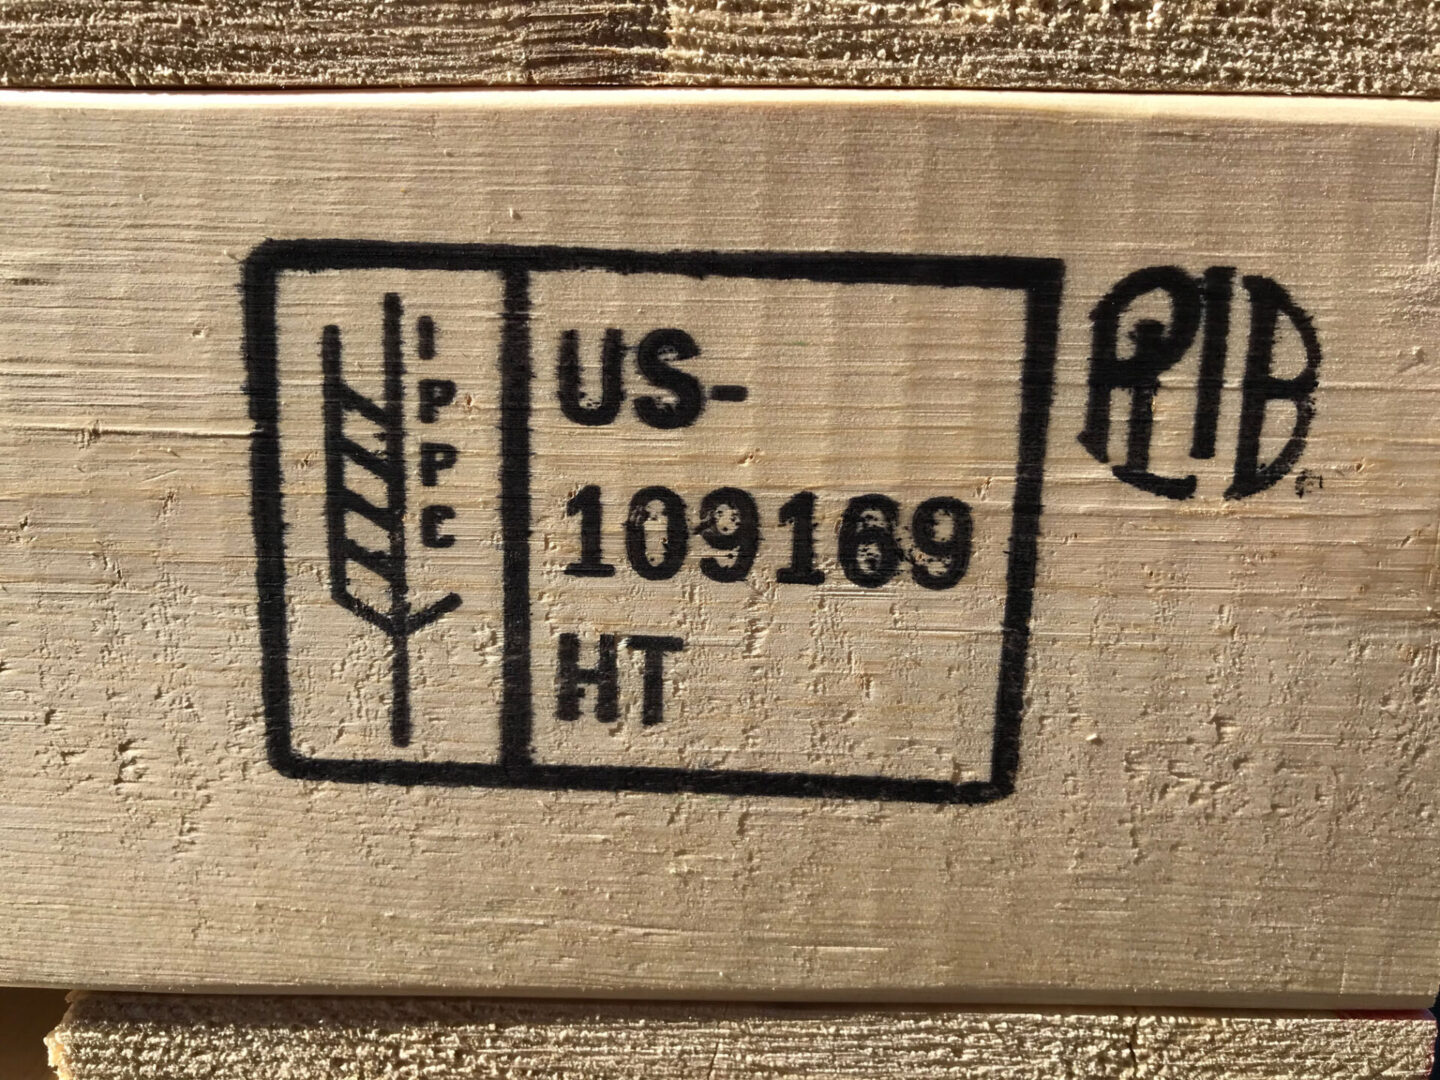 A cardboard box with the us 1 0 9 1 6 9 ht stamp on it.